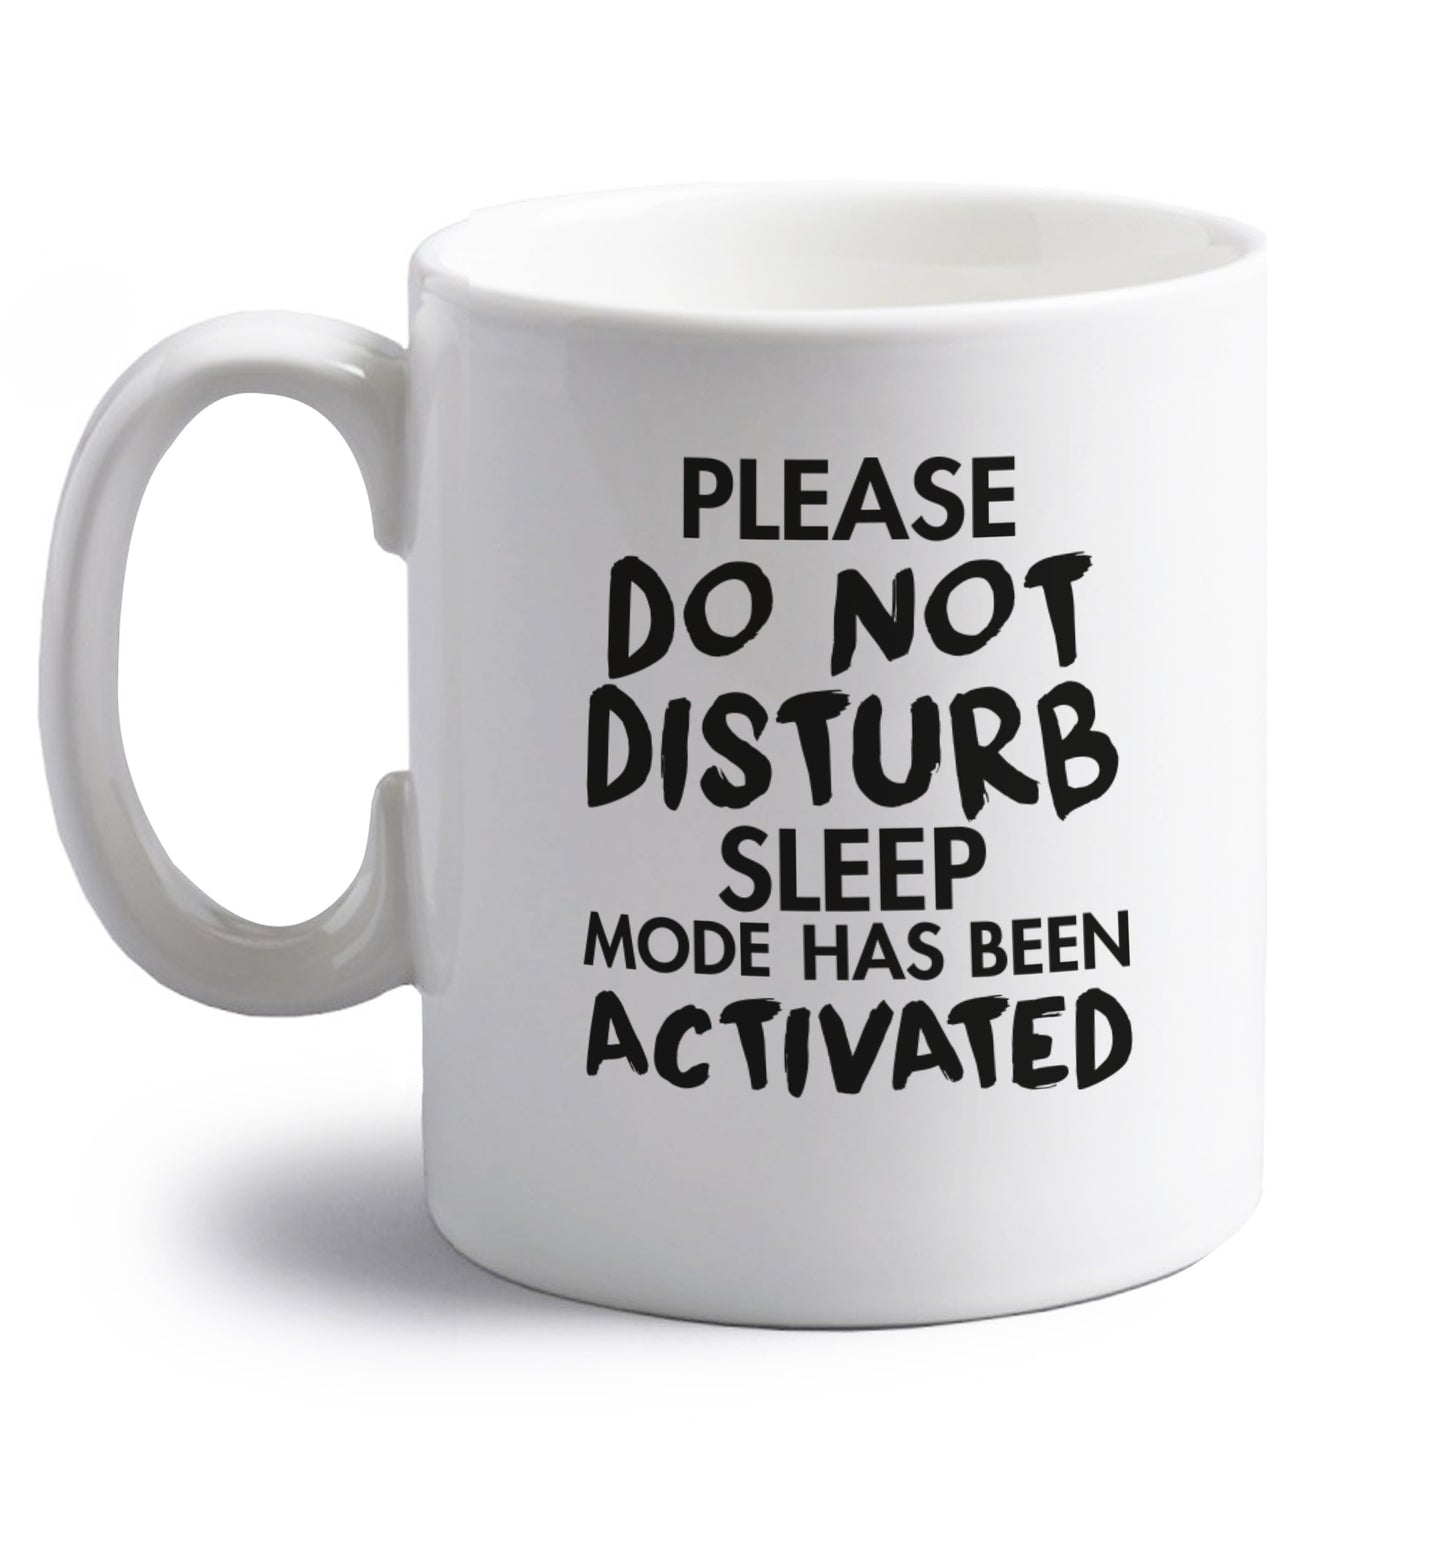 Please do not disturb sleeping mode has been activated right handed white ceramic mug 